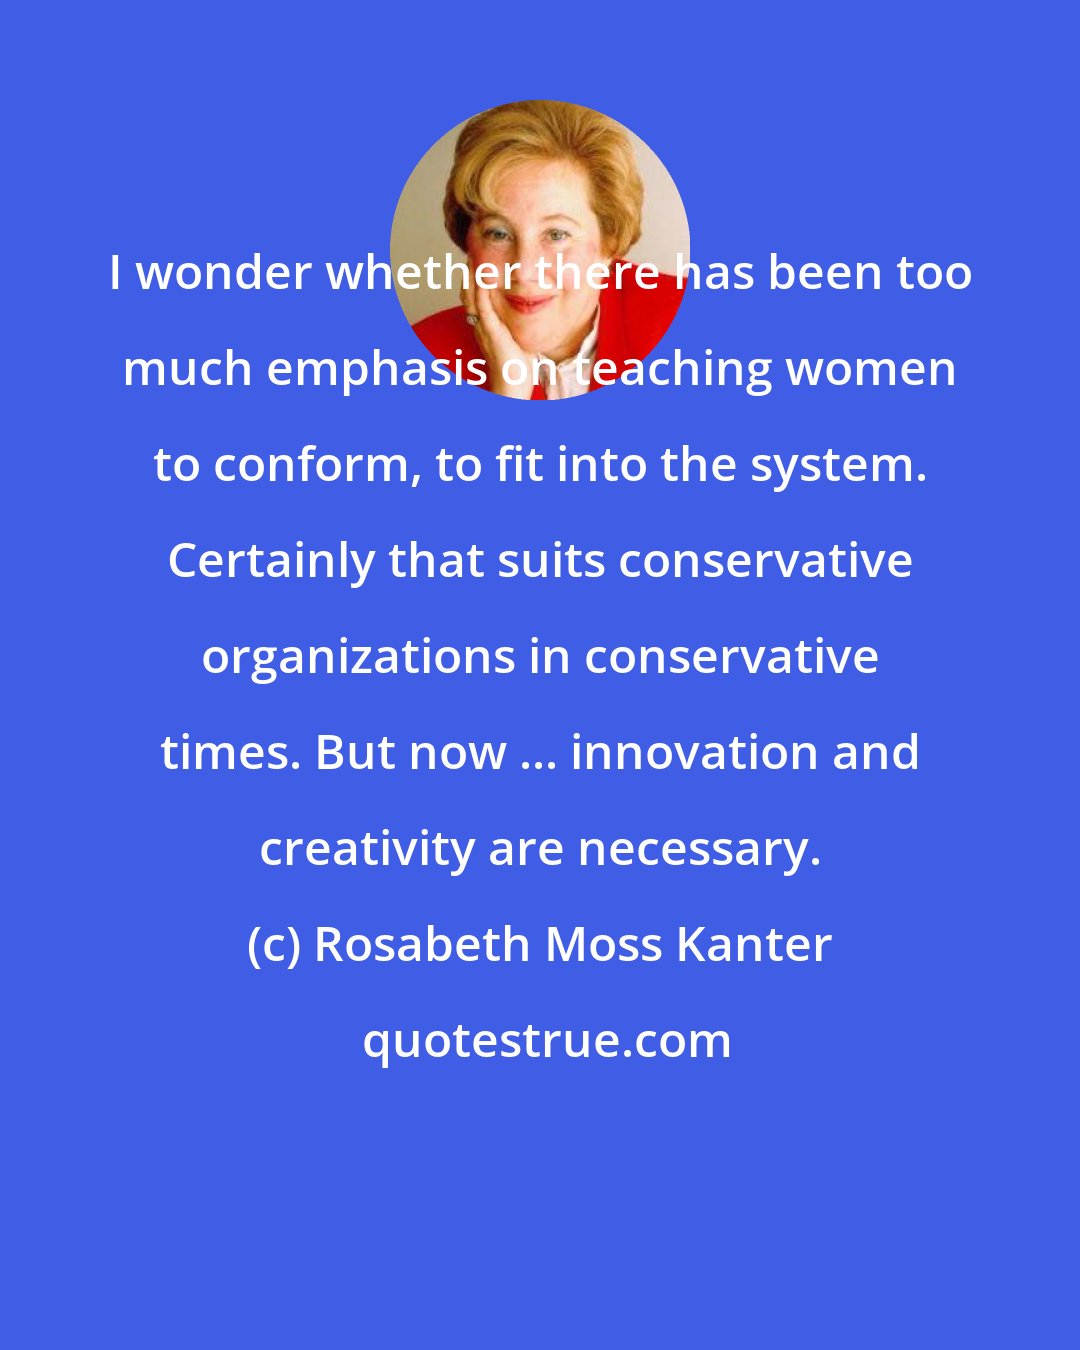 Rosabeth Moss Kanter: I wonder whether there has been too much emphasis on teaching women to conform, to fit into the system. Certainly that suits conservative organizations in conservative times. But now ... innovation and creativity are necessary.